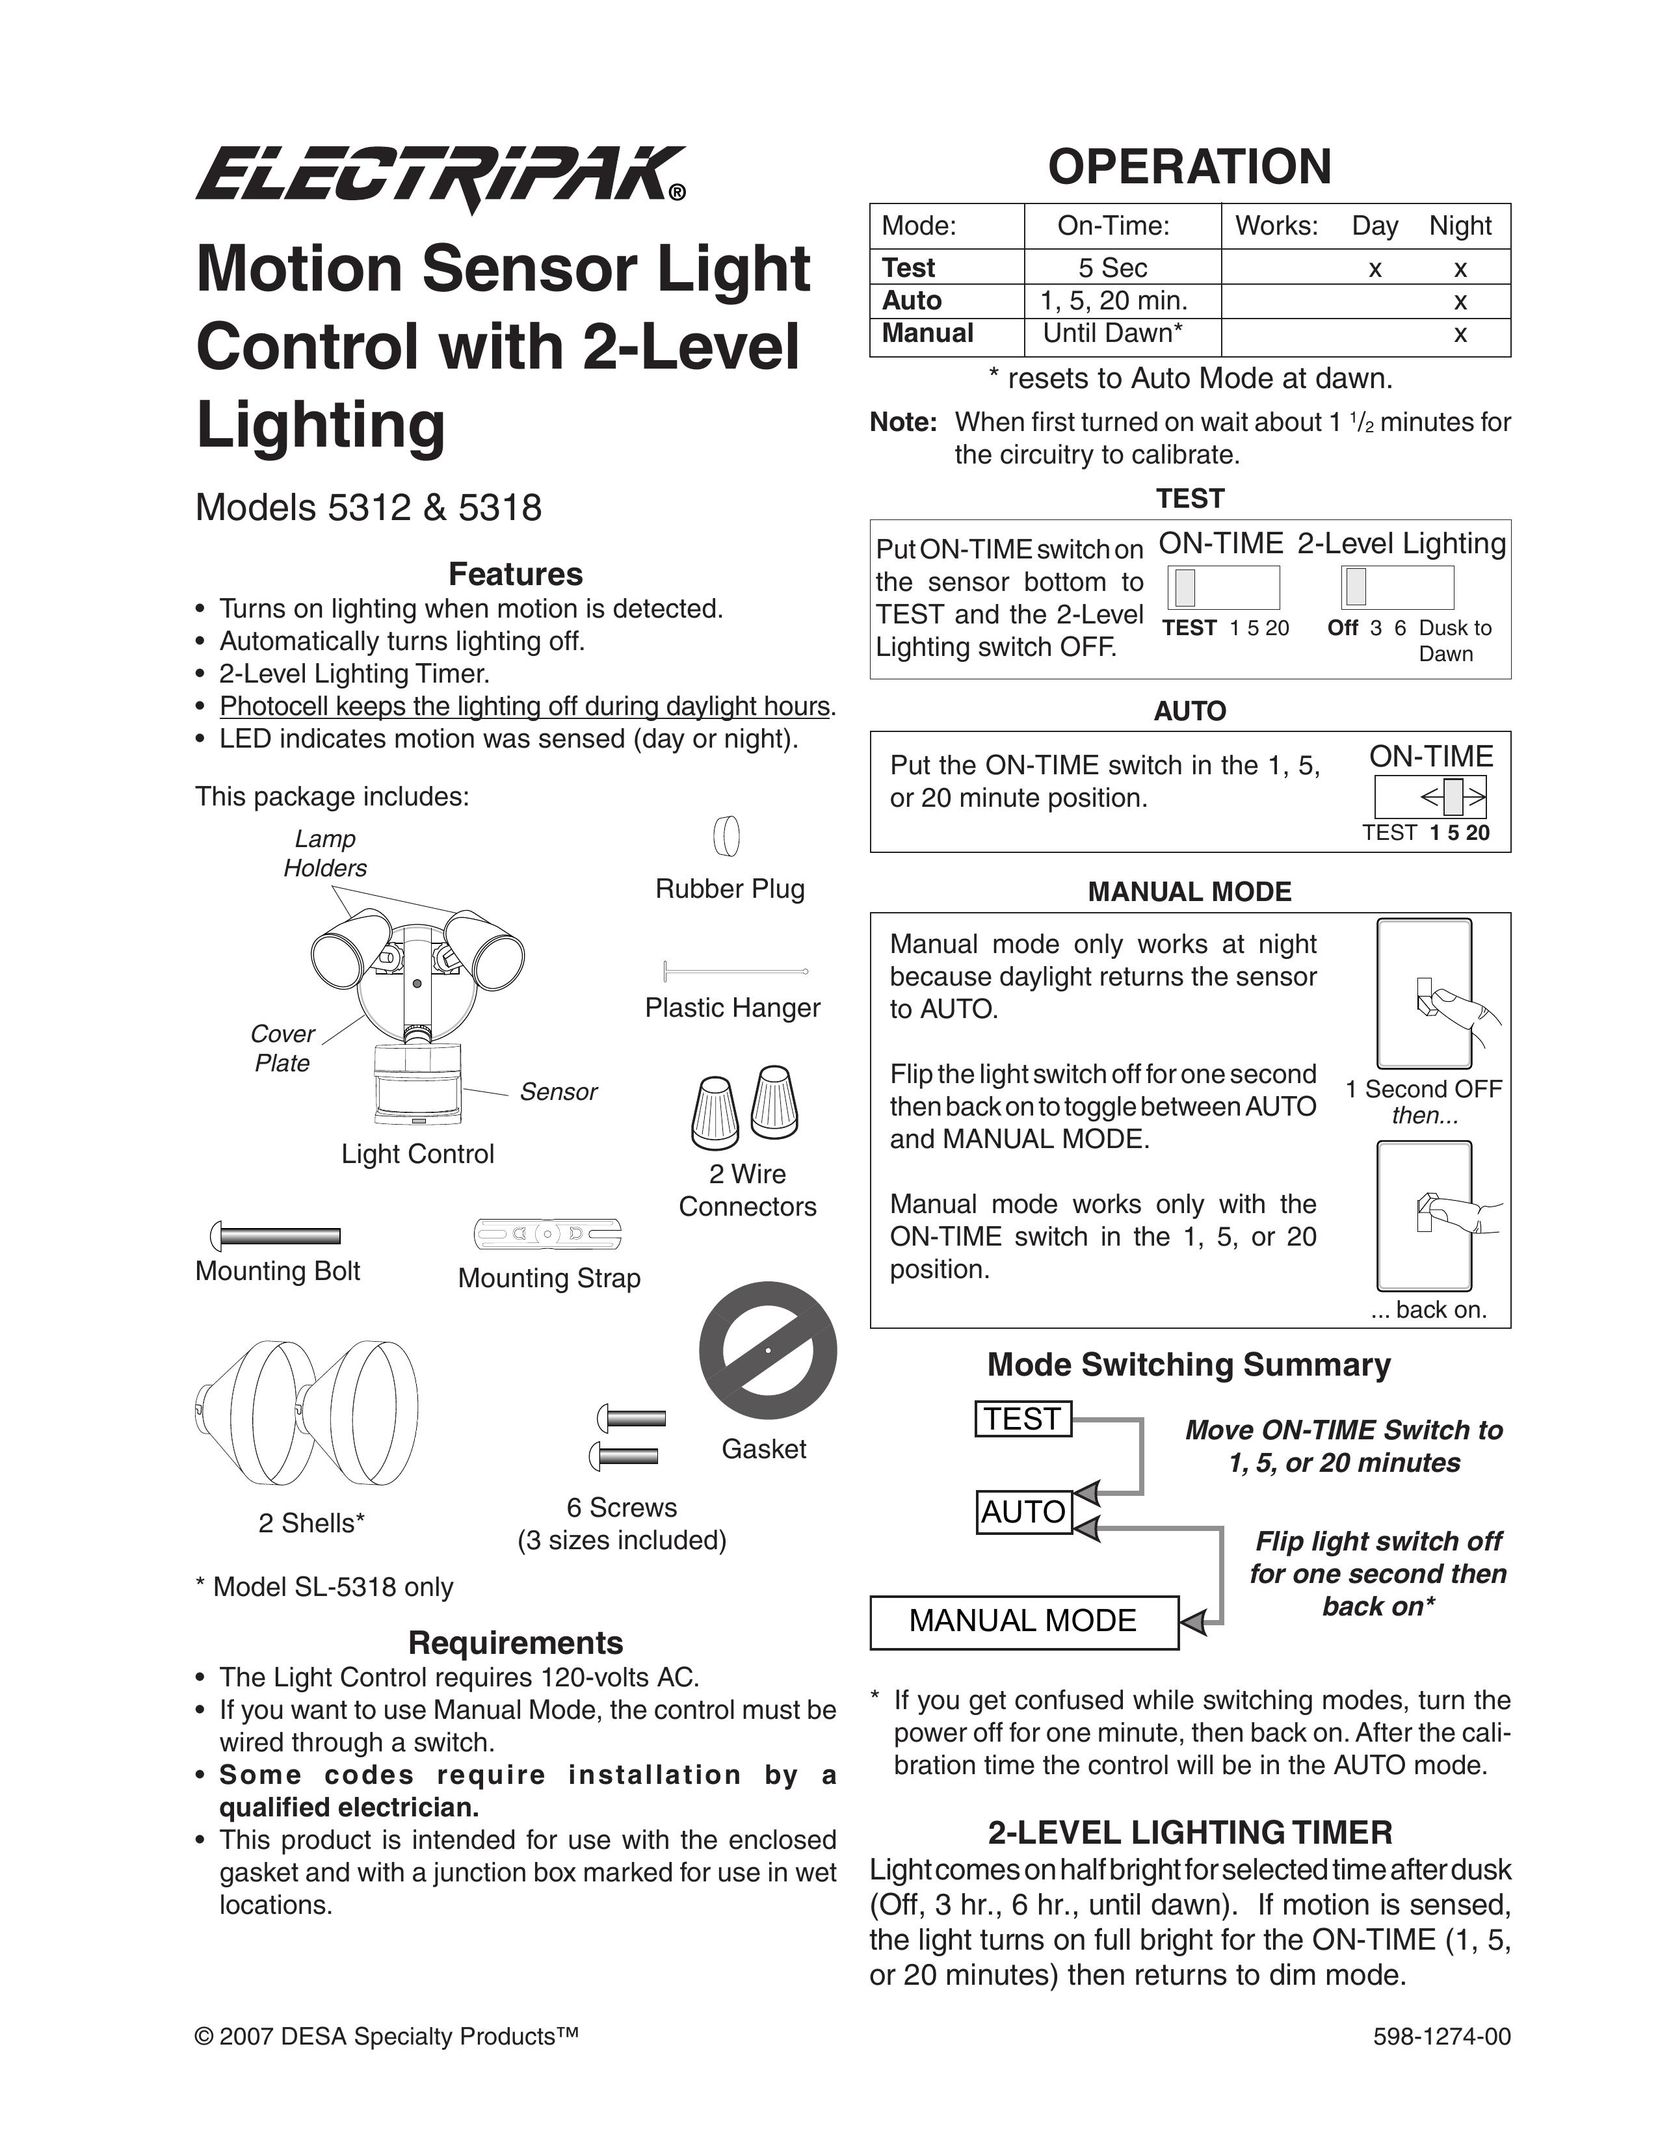 Desa SL-5326 Home Safety Product User Manual